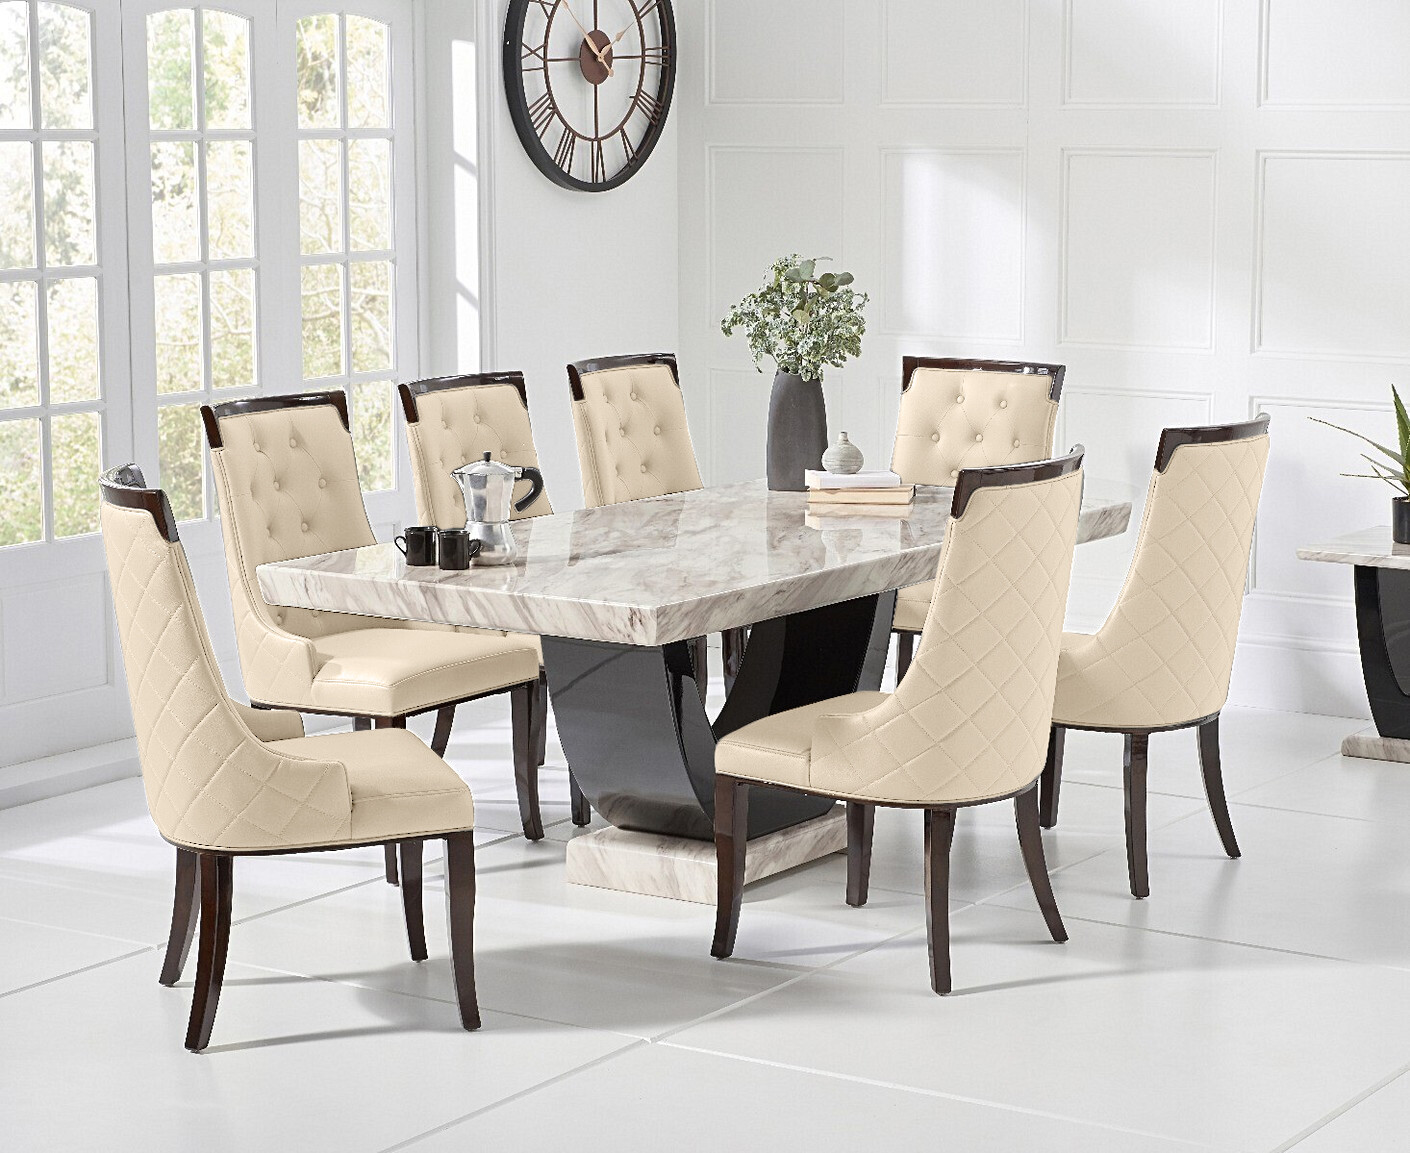 Photo 2 of Novara 200cm cream and black pedestal marble dining table with 12 cream francesca chairs